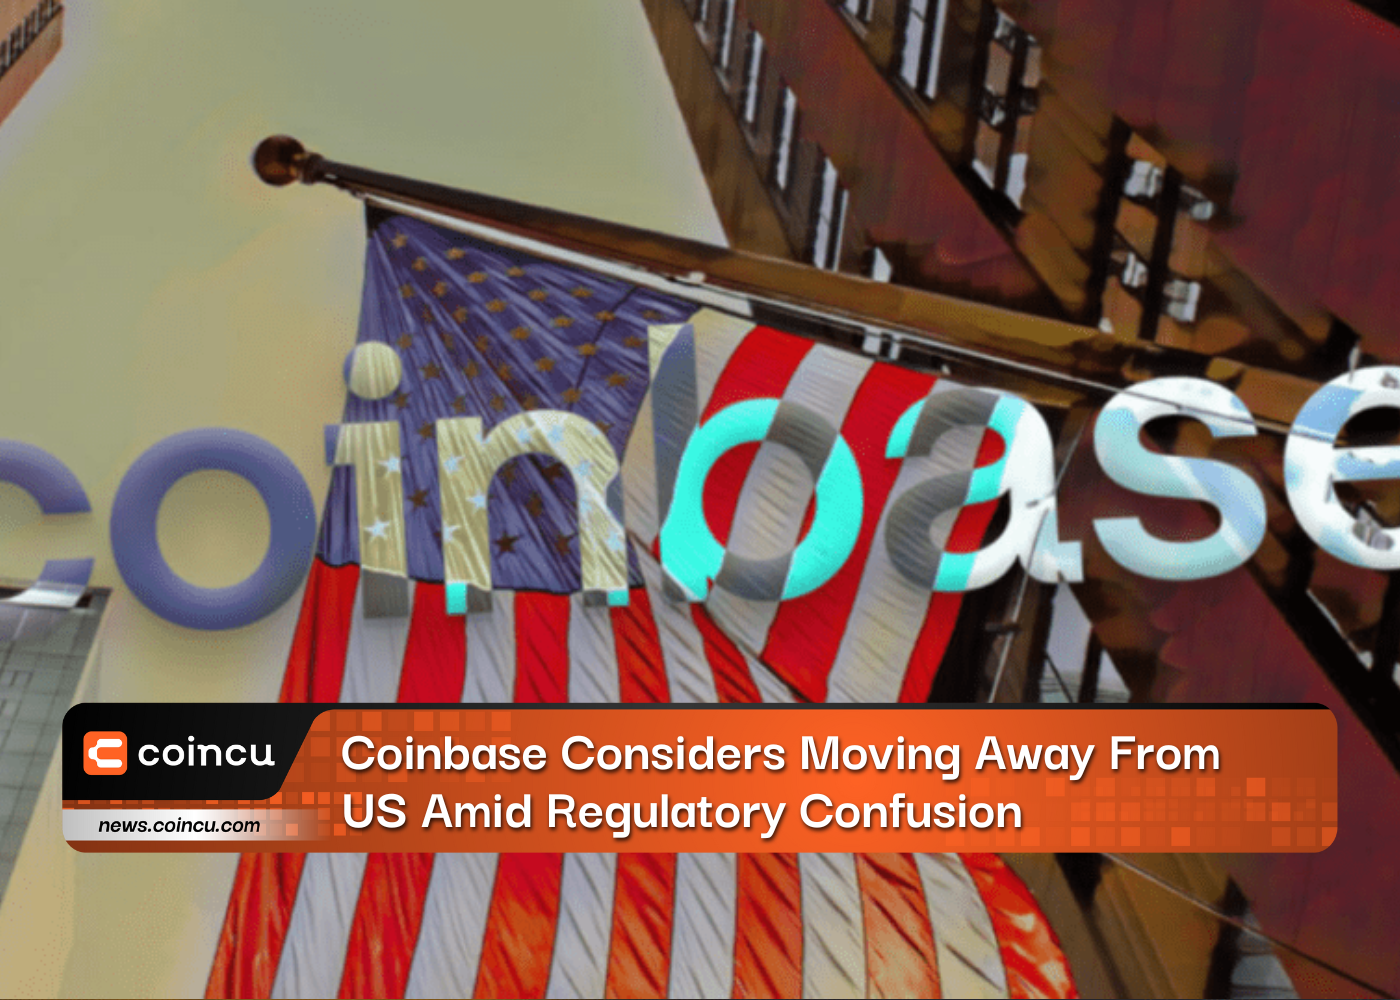 Coinbase Considers Moving Away From US Amid Regulatory Confusion